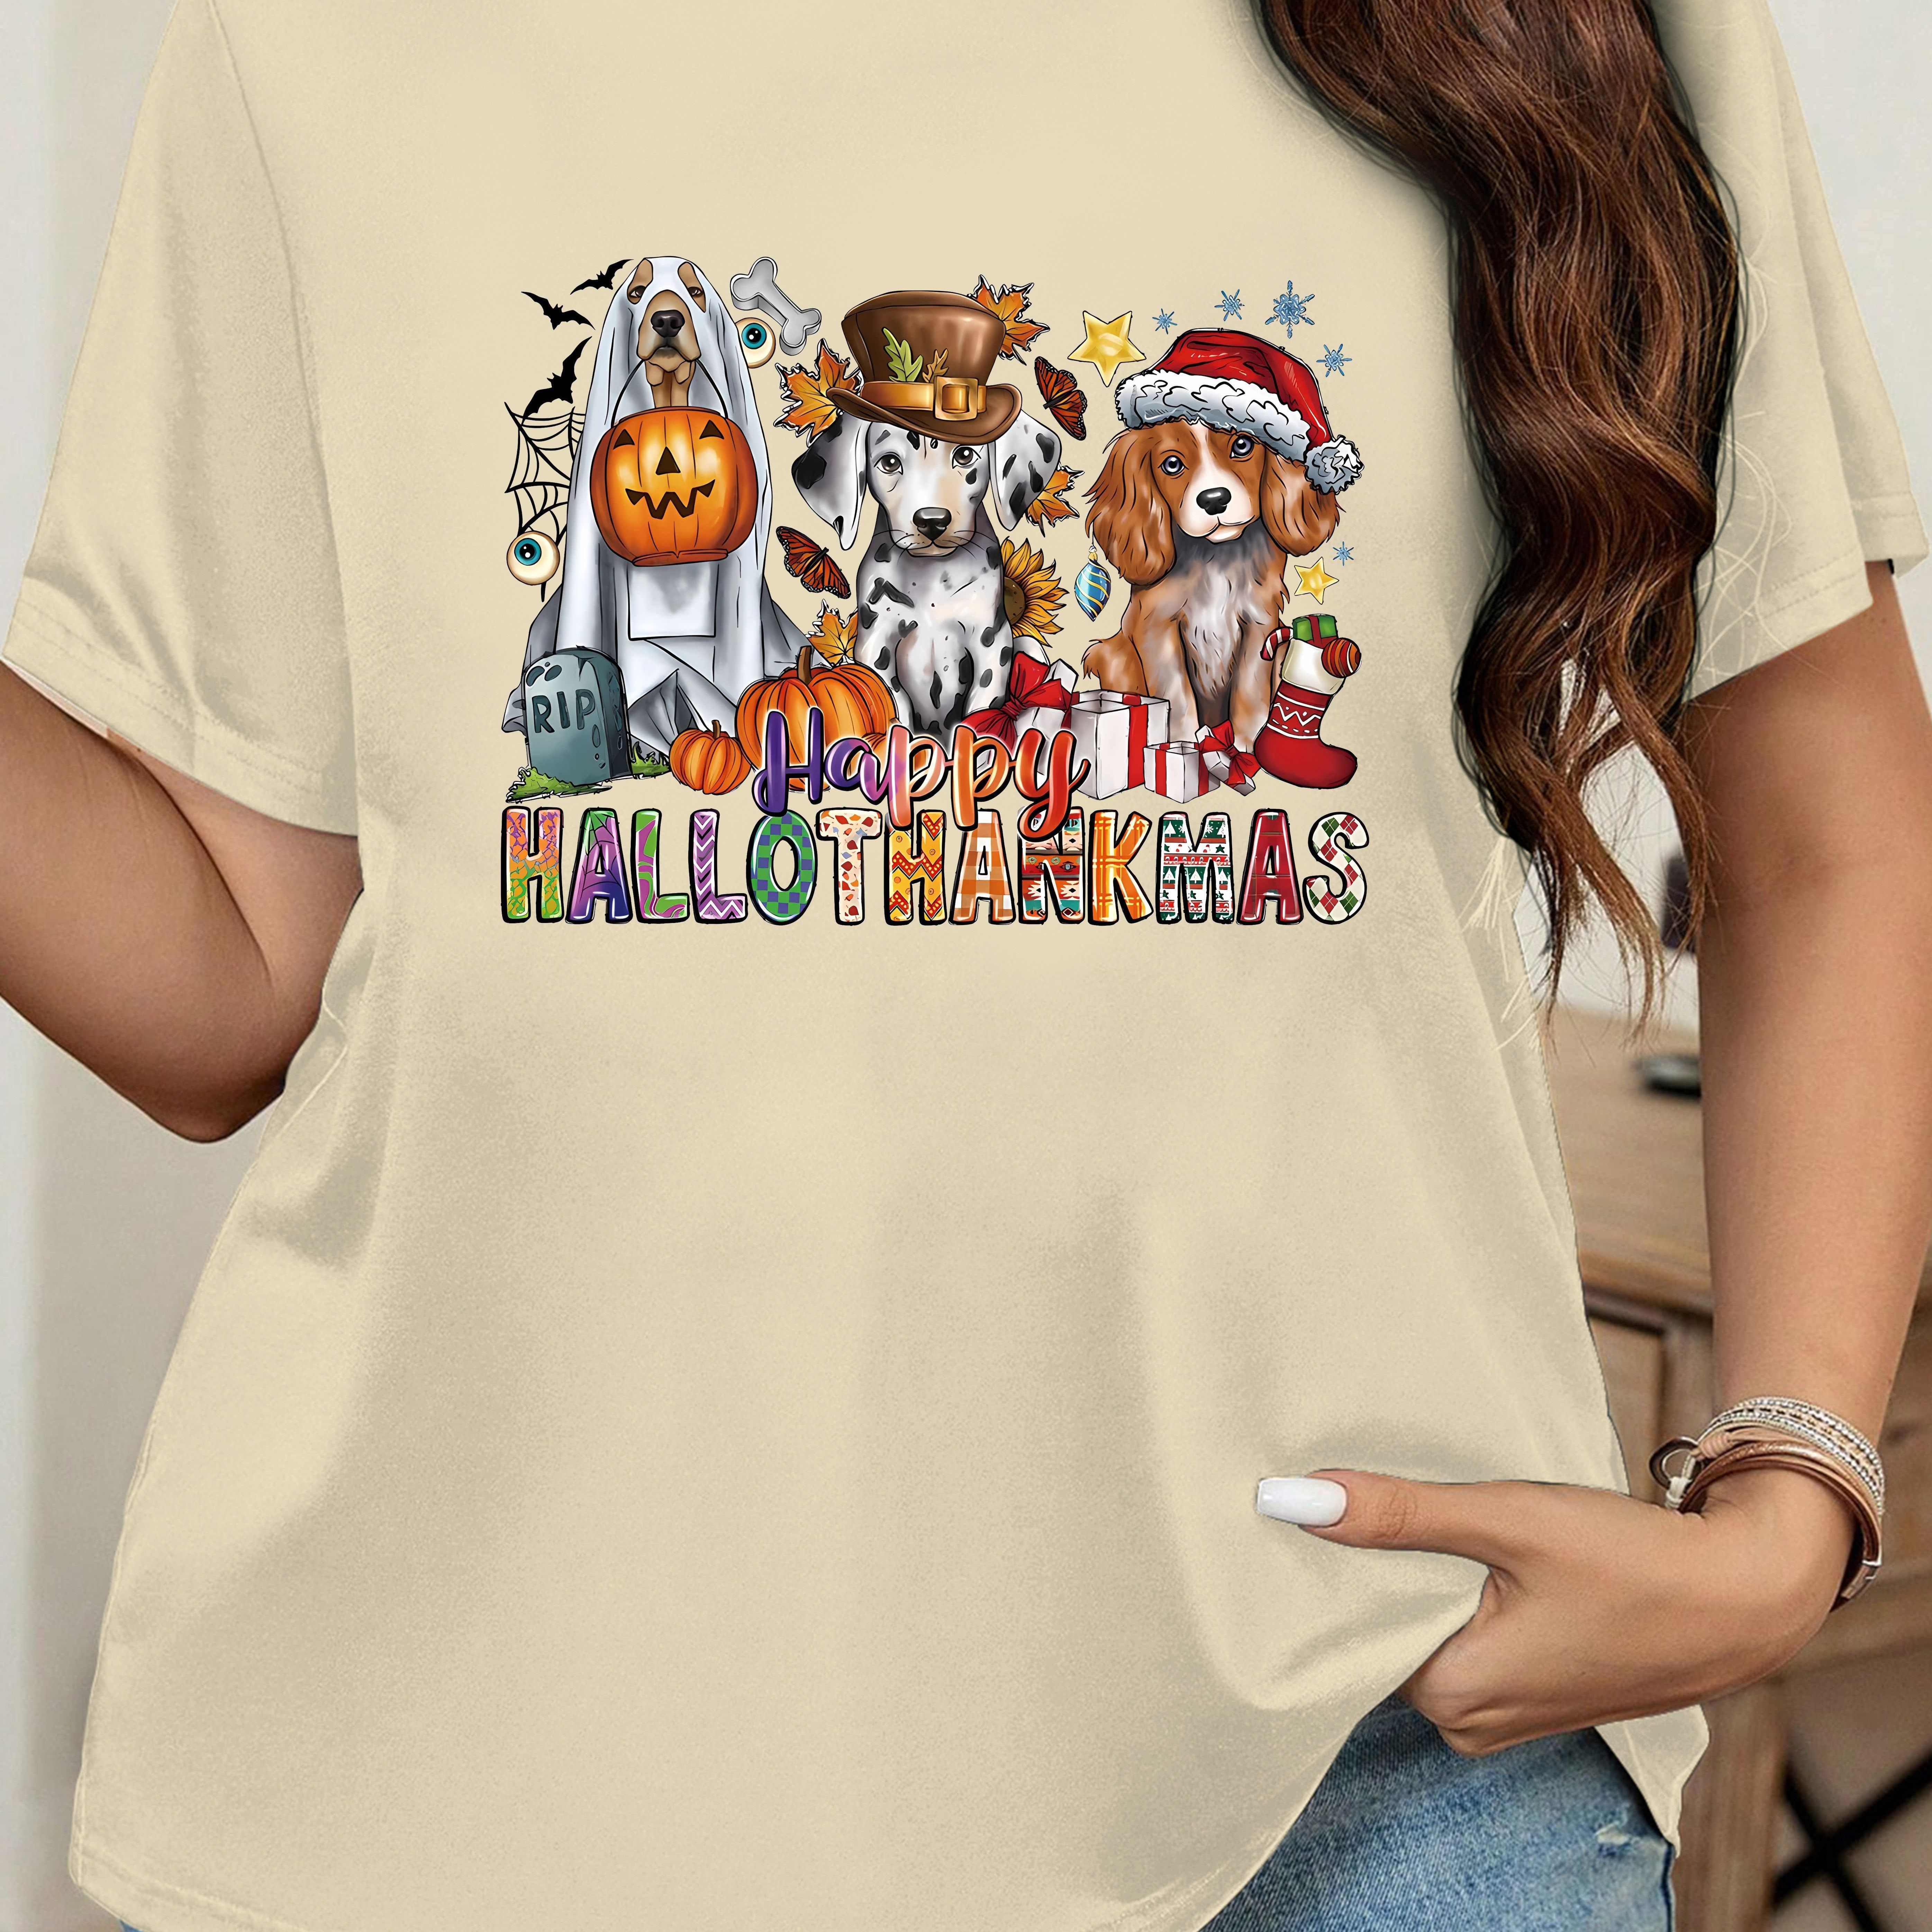 

Women's Plus Size Halloween T-shirt, Casual Style, Festive Ghost Dog & Pumpkin Print With Lettering, Short Sleeve, Round Neck Top